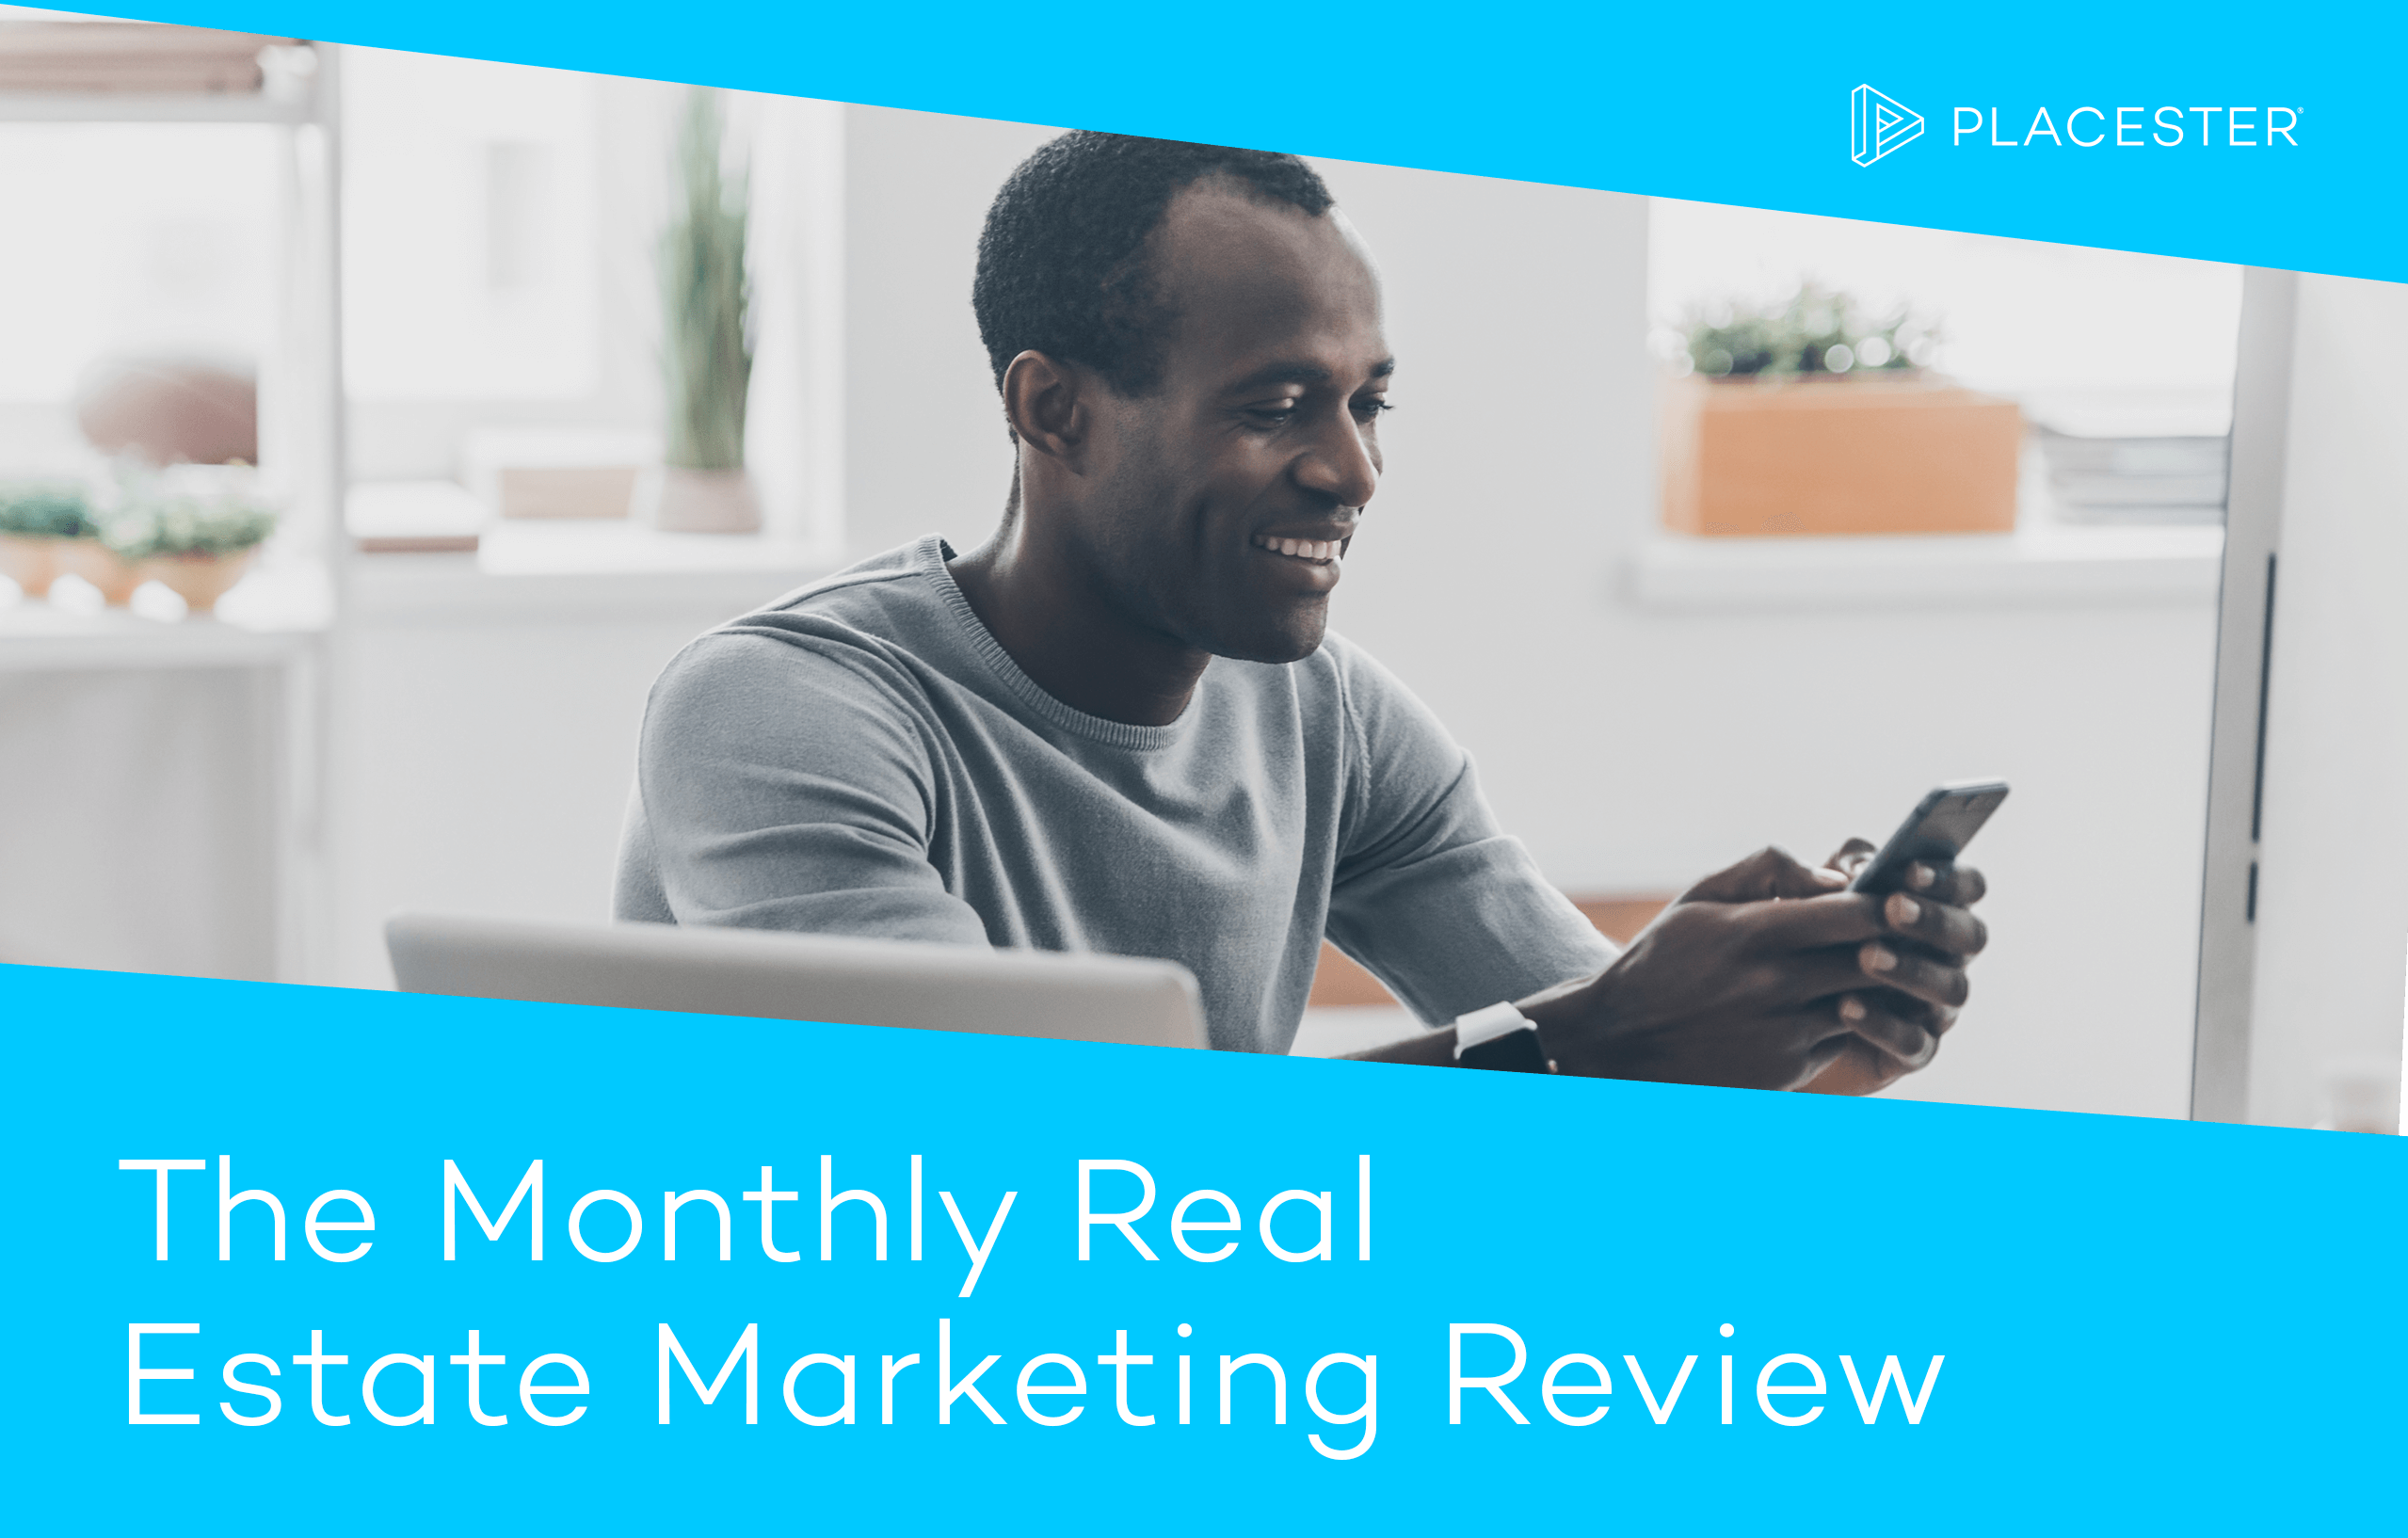 Monthly Real Estate Marketing Review: Free Realtor Websites, Inbound Data, and More